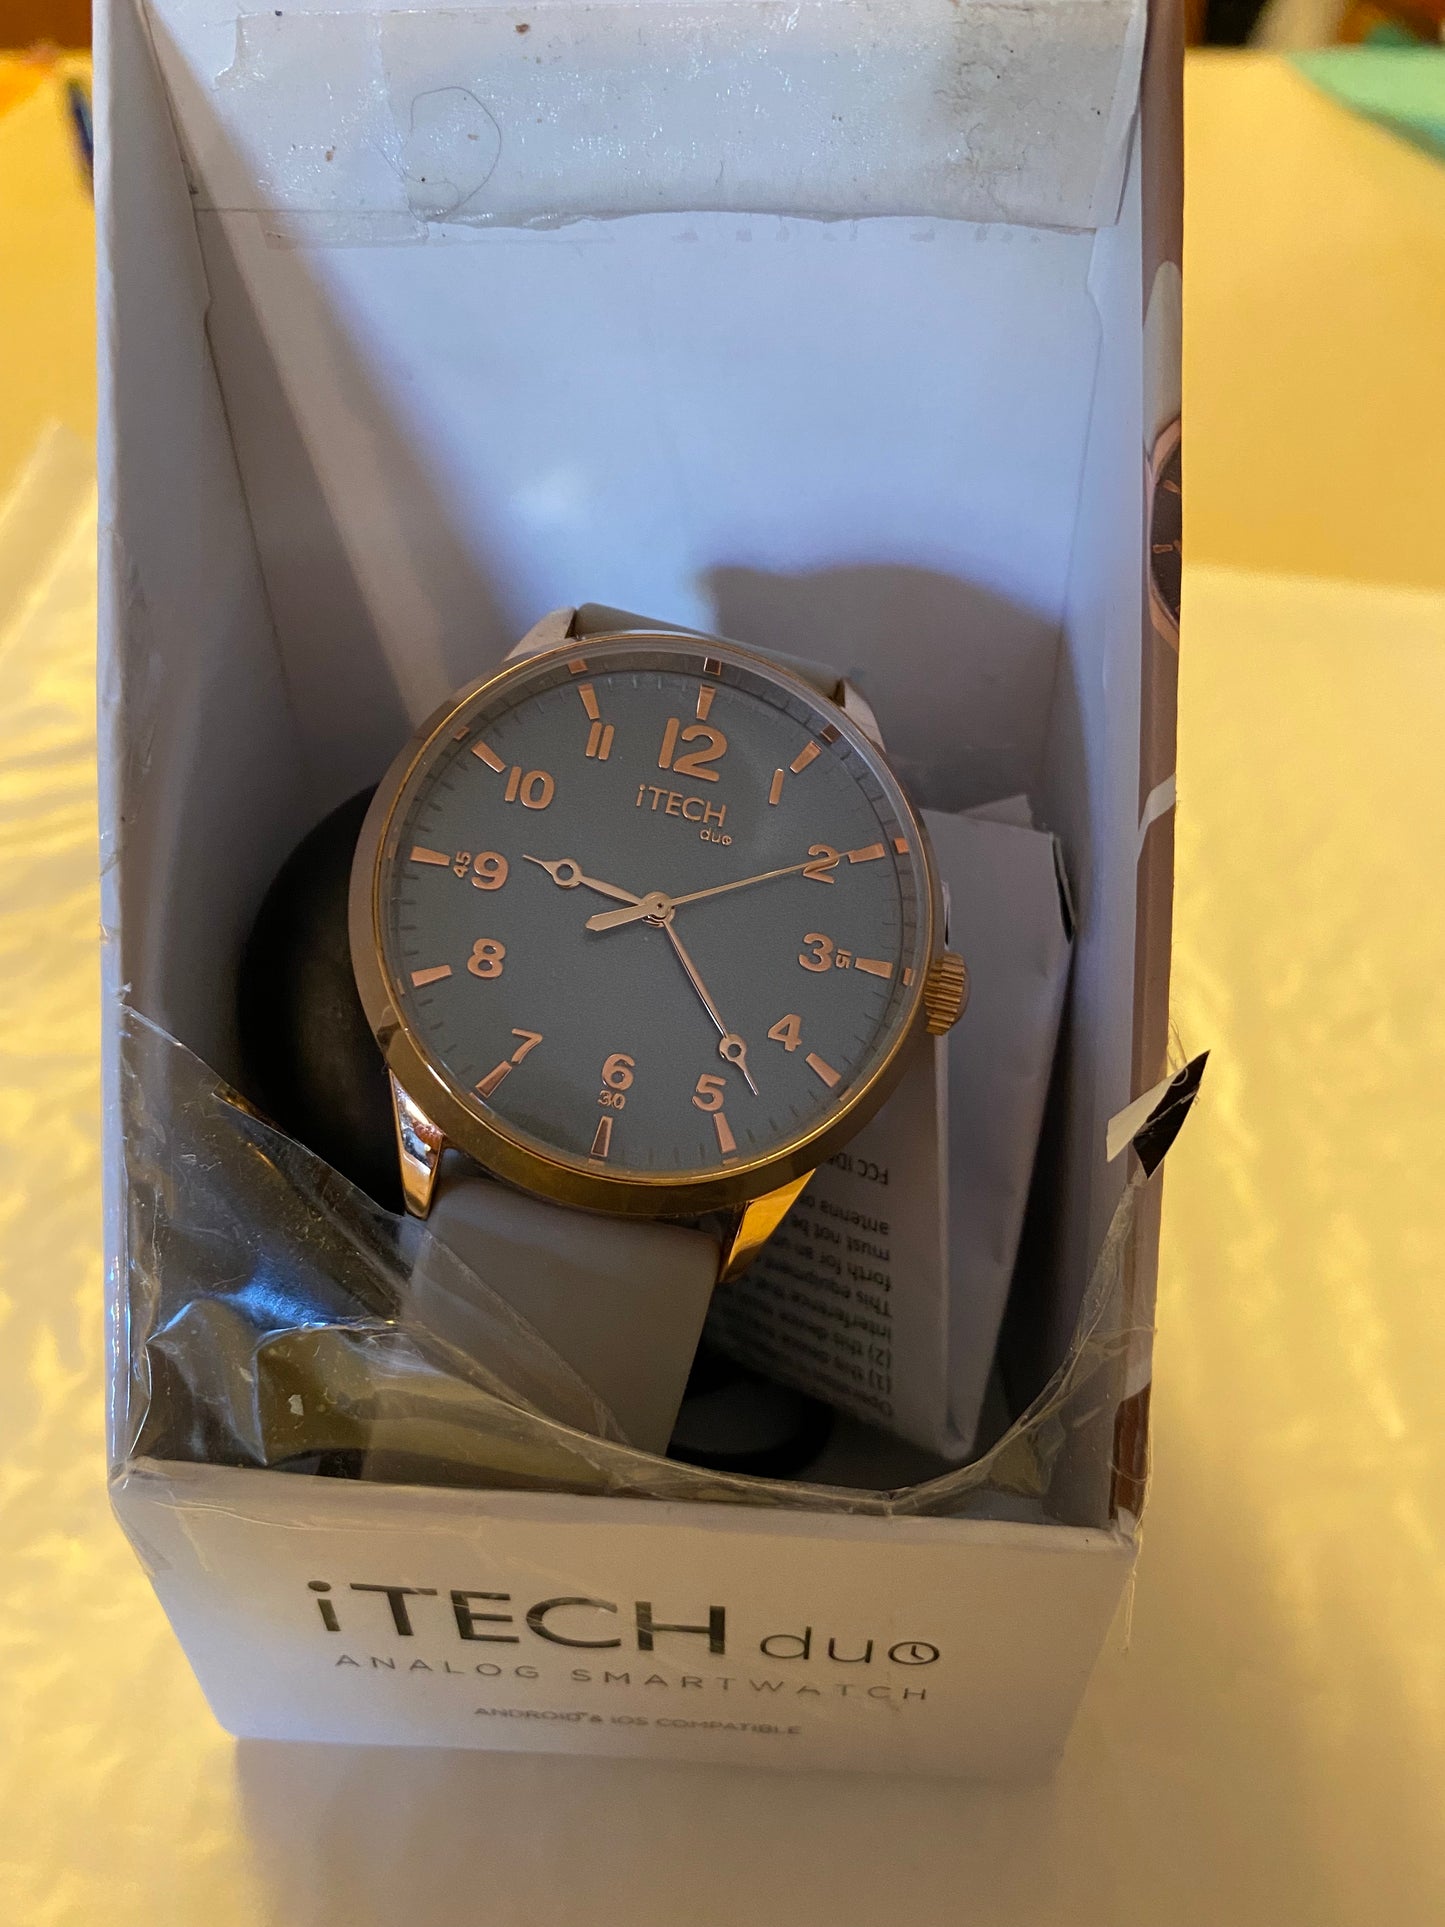 iTech Duo Analog Smartwatch for Android and IOS